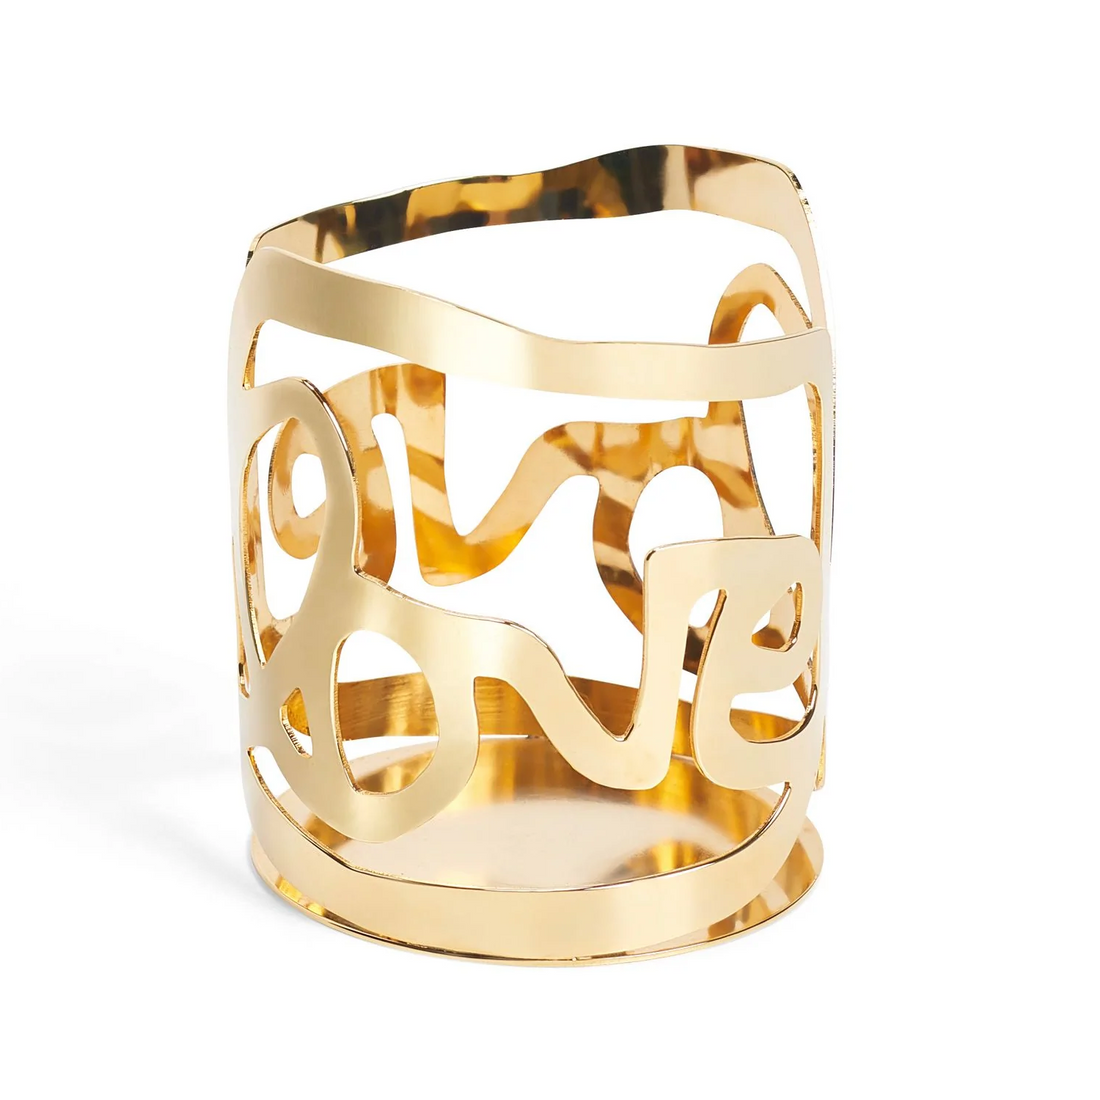 grantLOVE x Amber Sakai - "CHAPARRAL" Candle with Iconic LOVE Holder